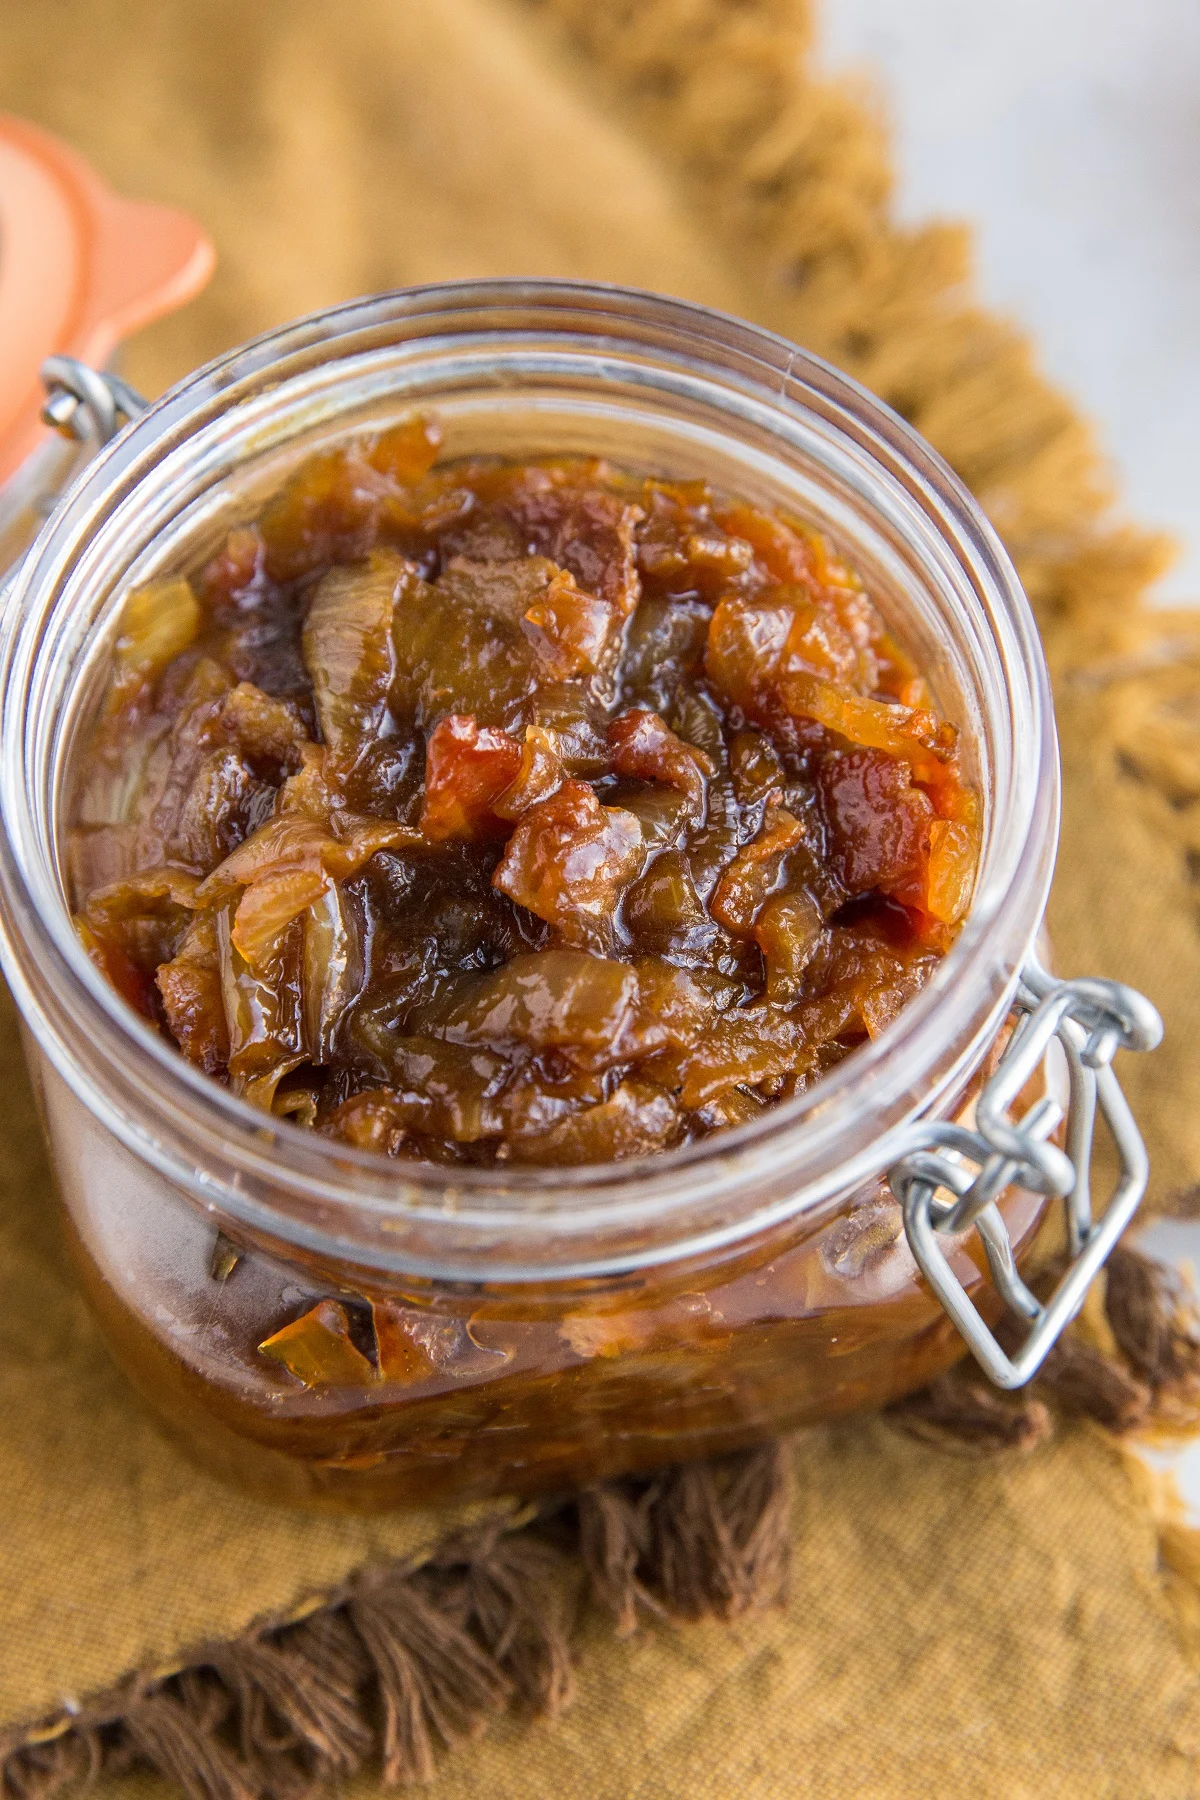 Jar full of freshly made bacon jam on top of a golden-brown napkin